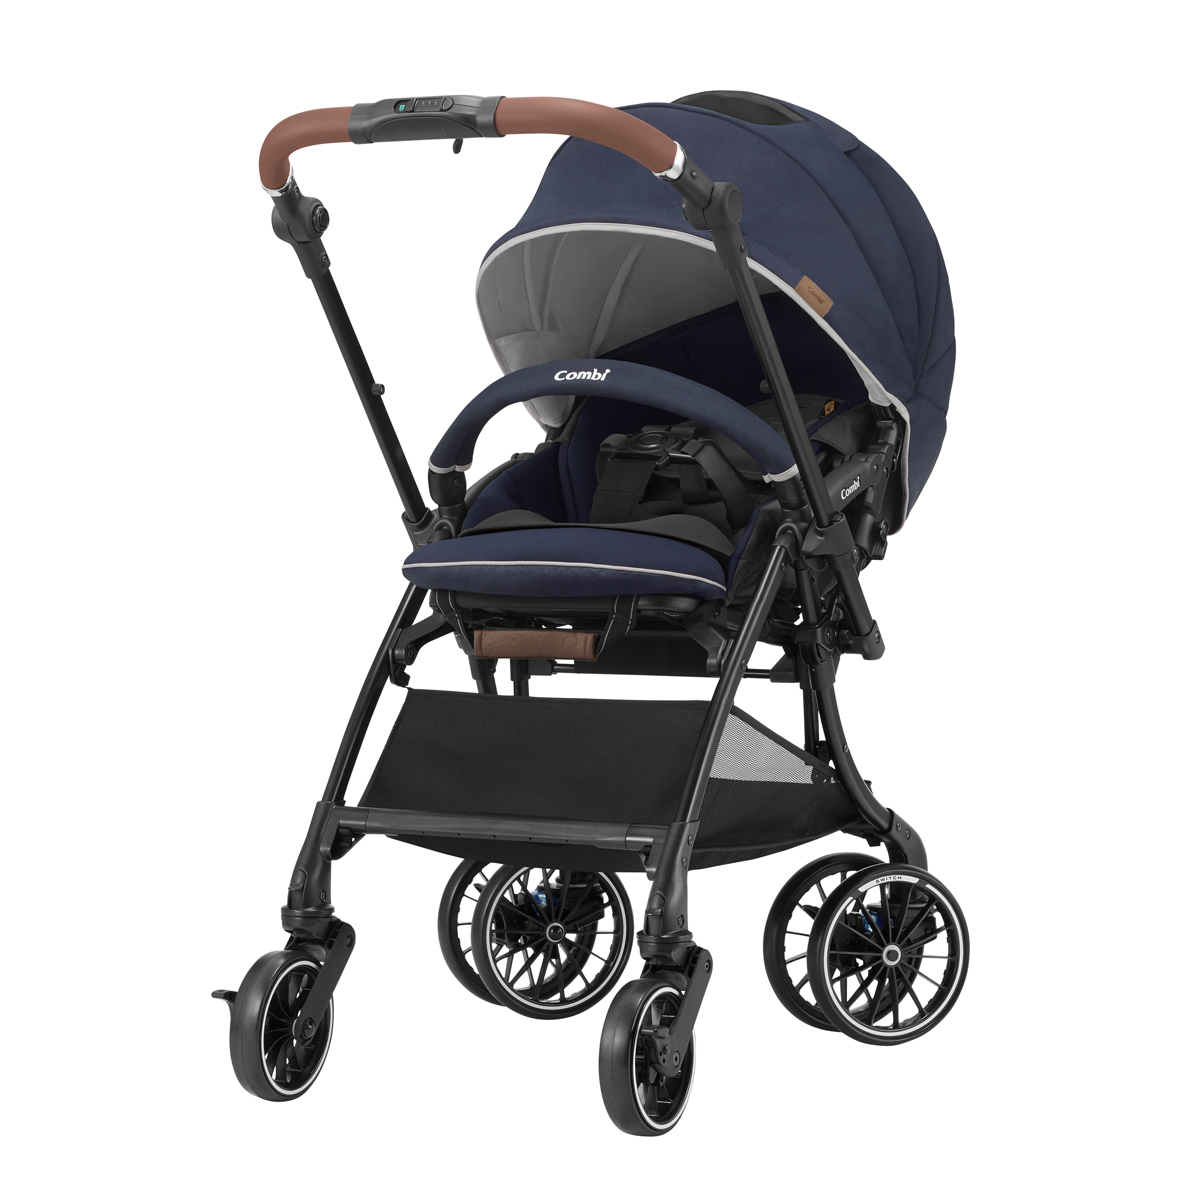 Combi Reversible Handle Stroller - Sugocal Switch + Freebies worth $114.70